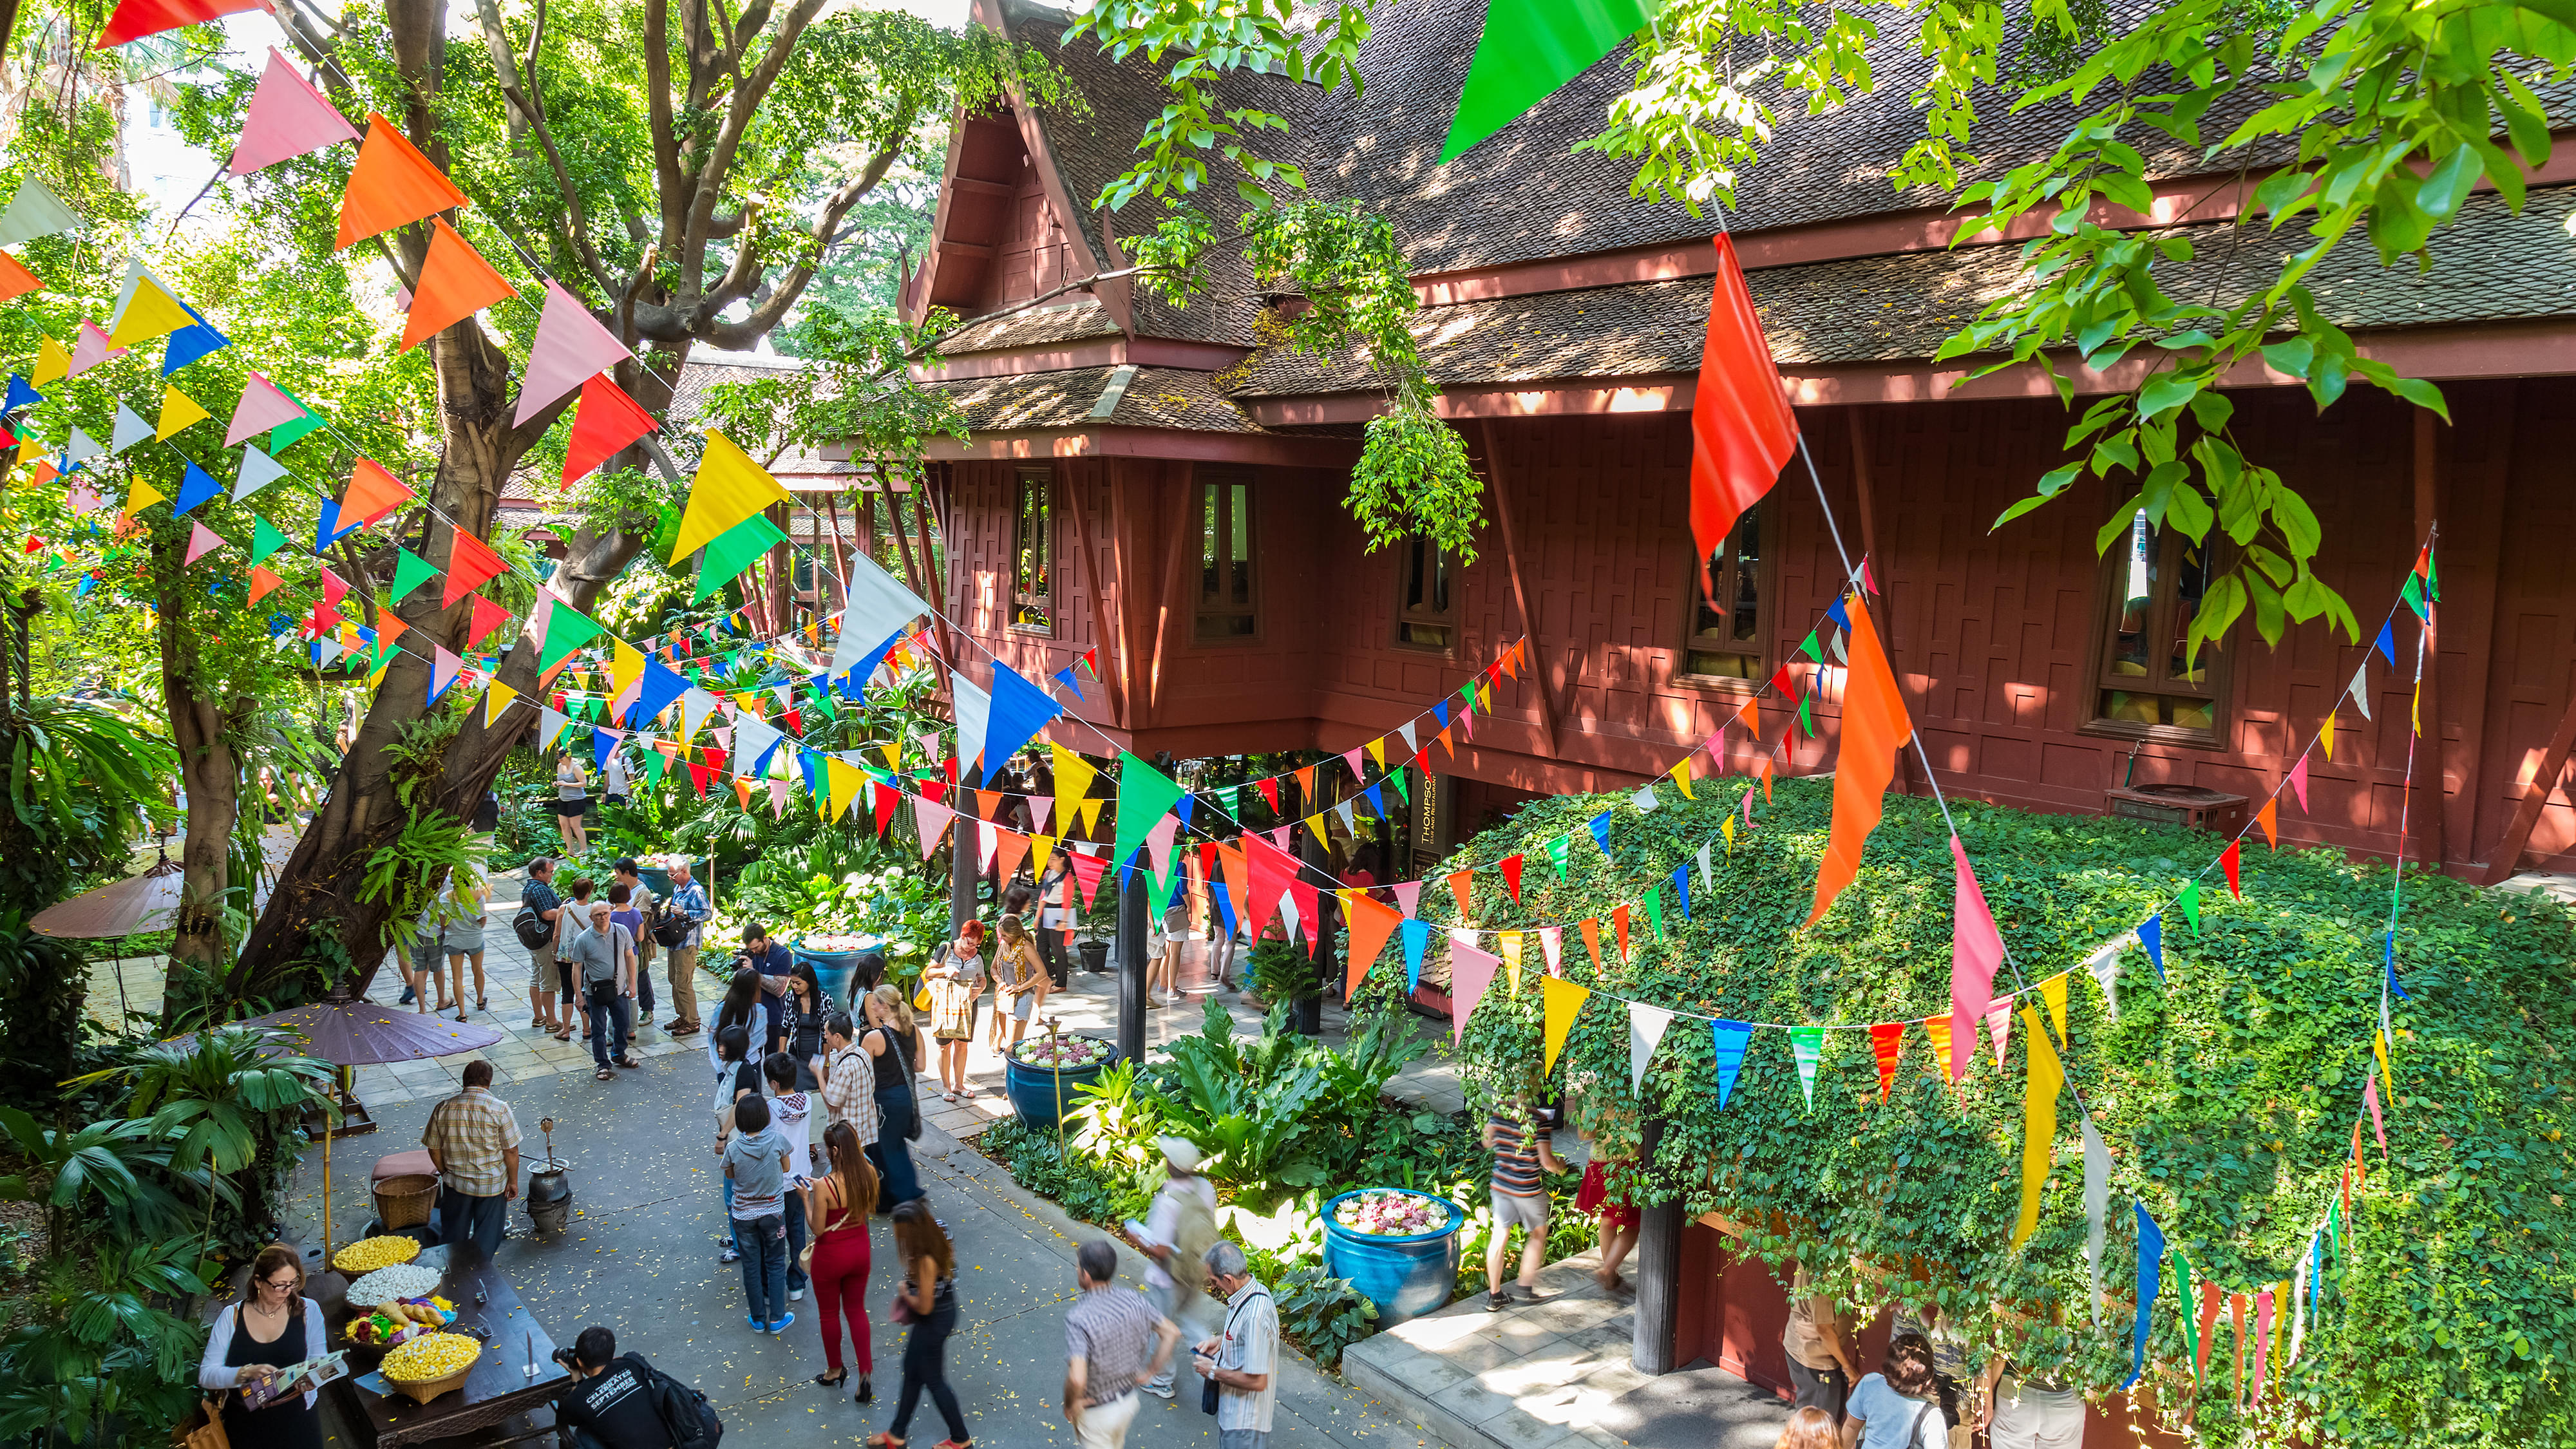 Admire the traditional Thai-setting of this place